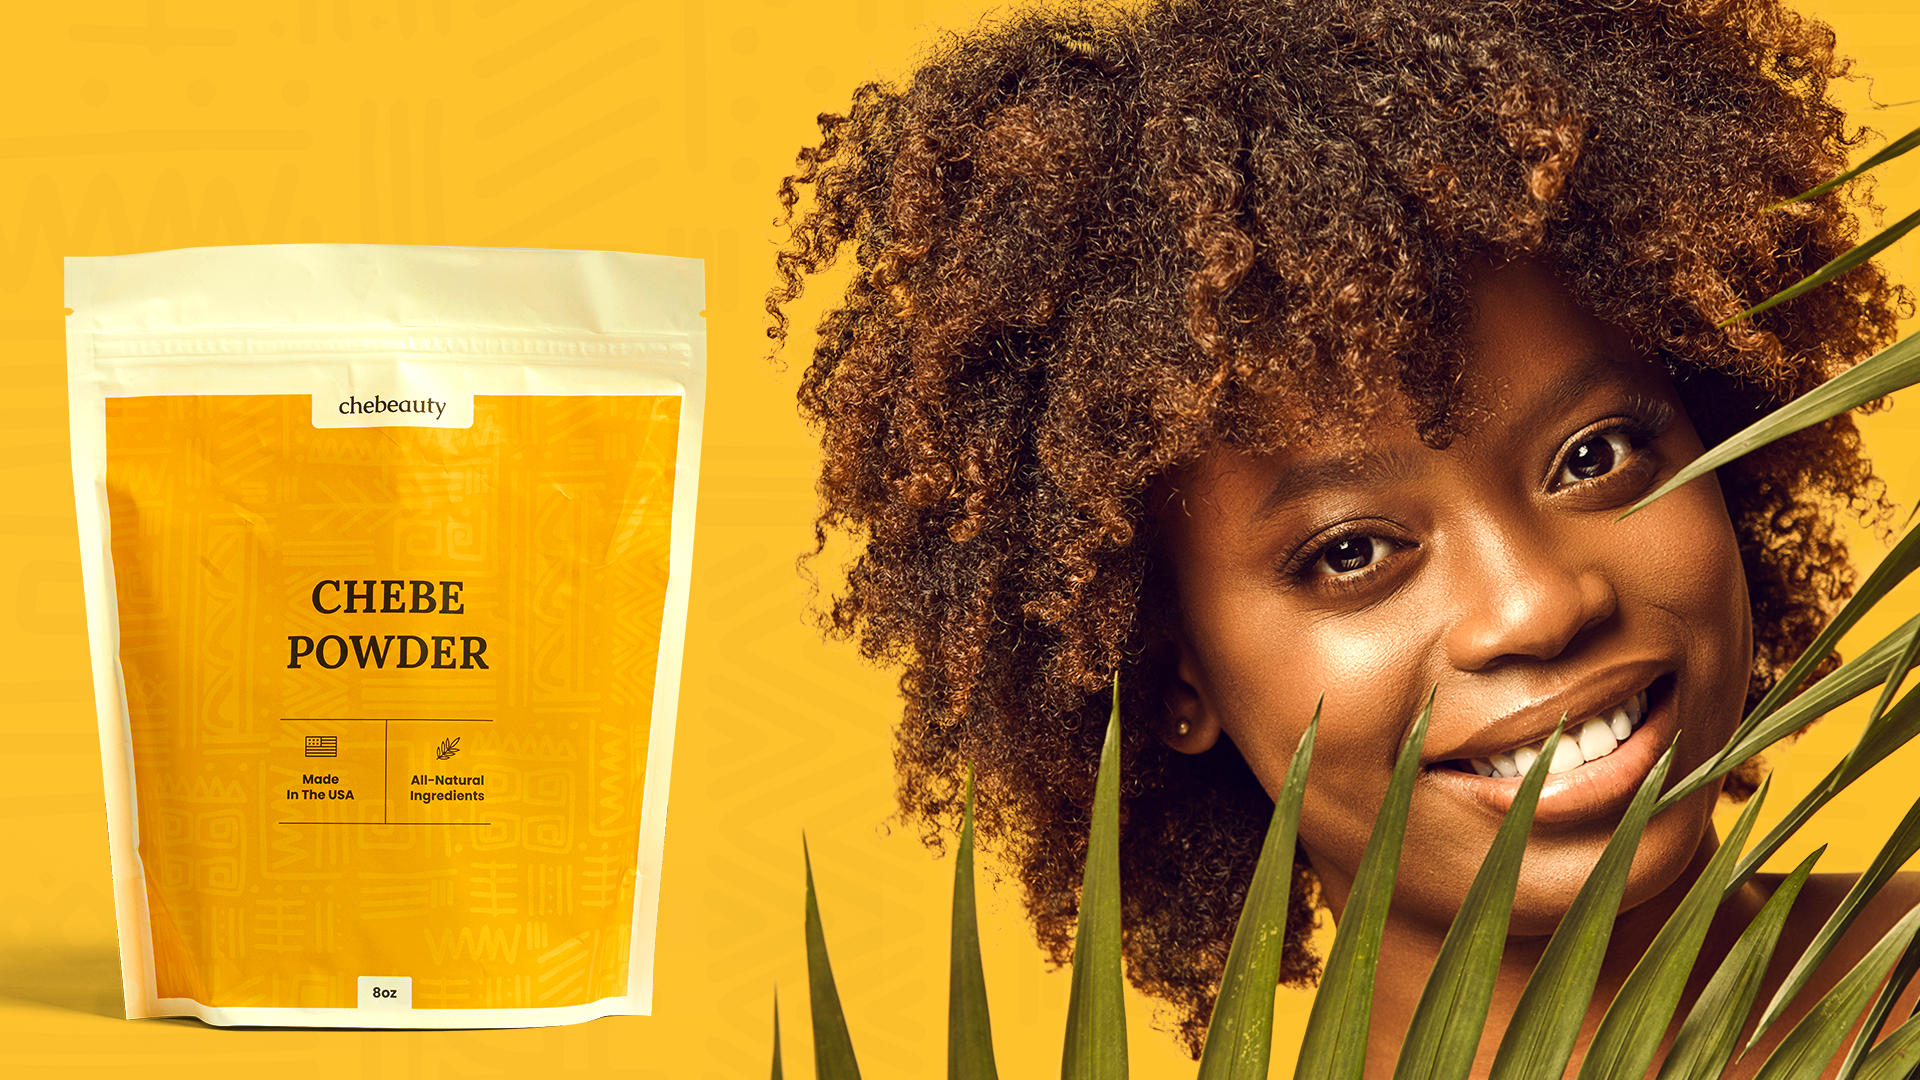 What Makes Chebe Powder a Must-Have in Your Hair Care Routine?